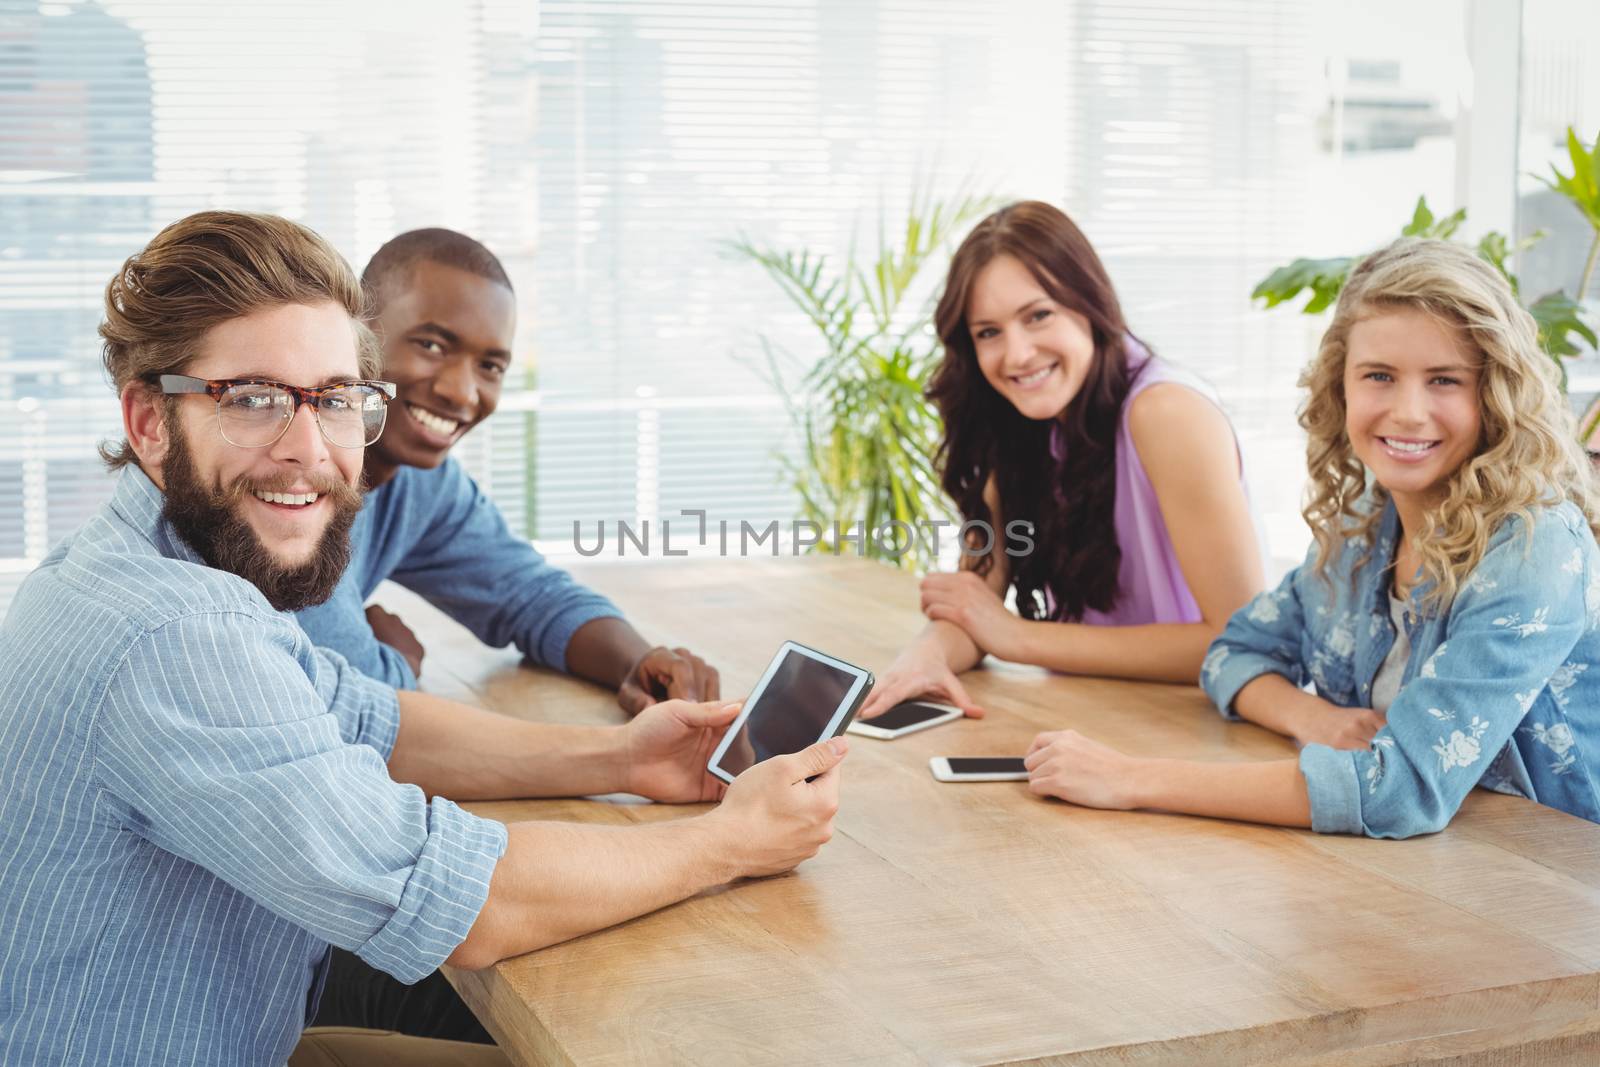 Portrait of smiling business professionals using technology at desk  by Wavebreakmedia